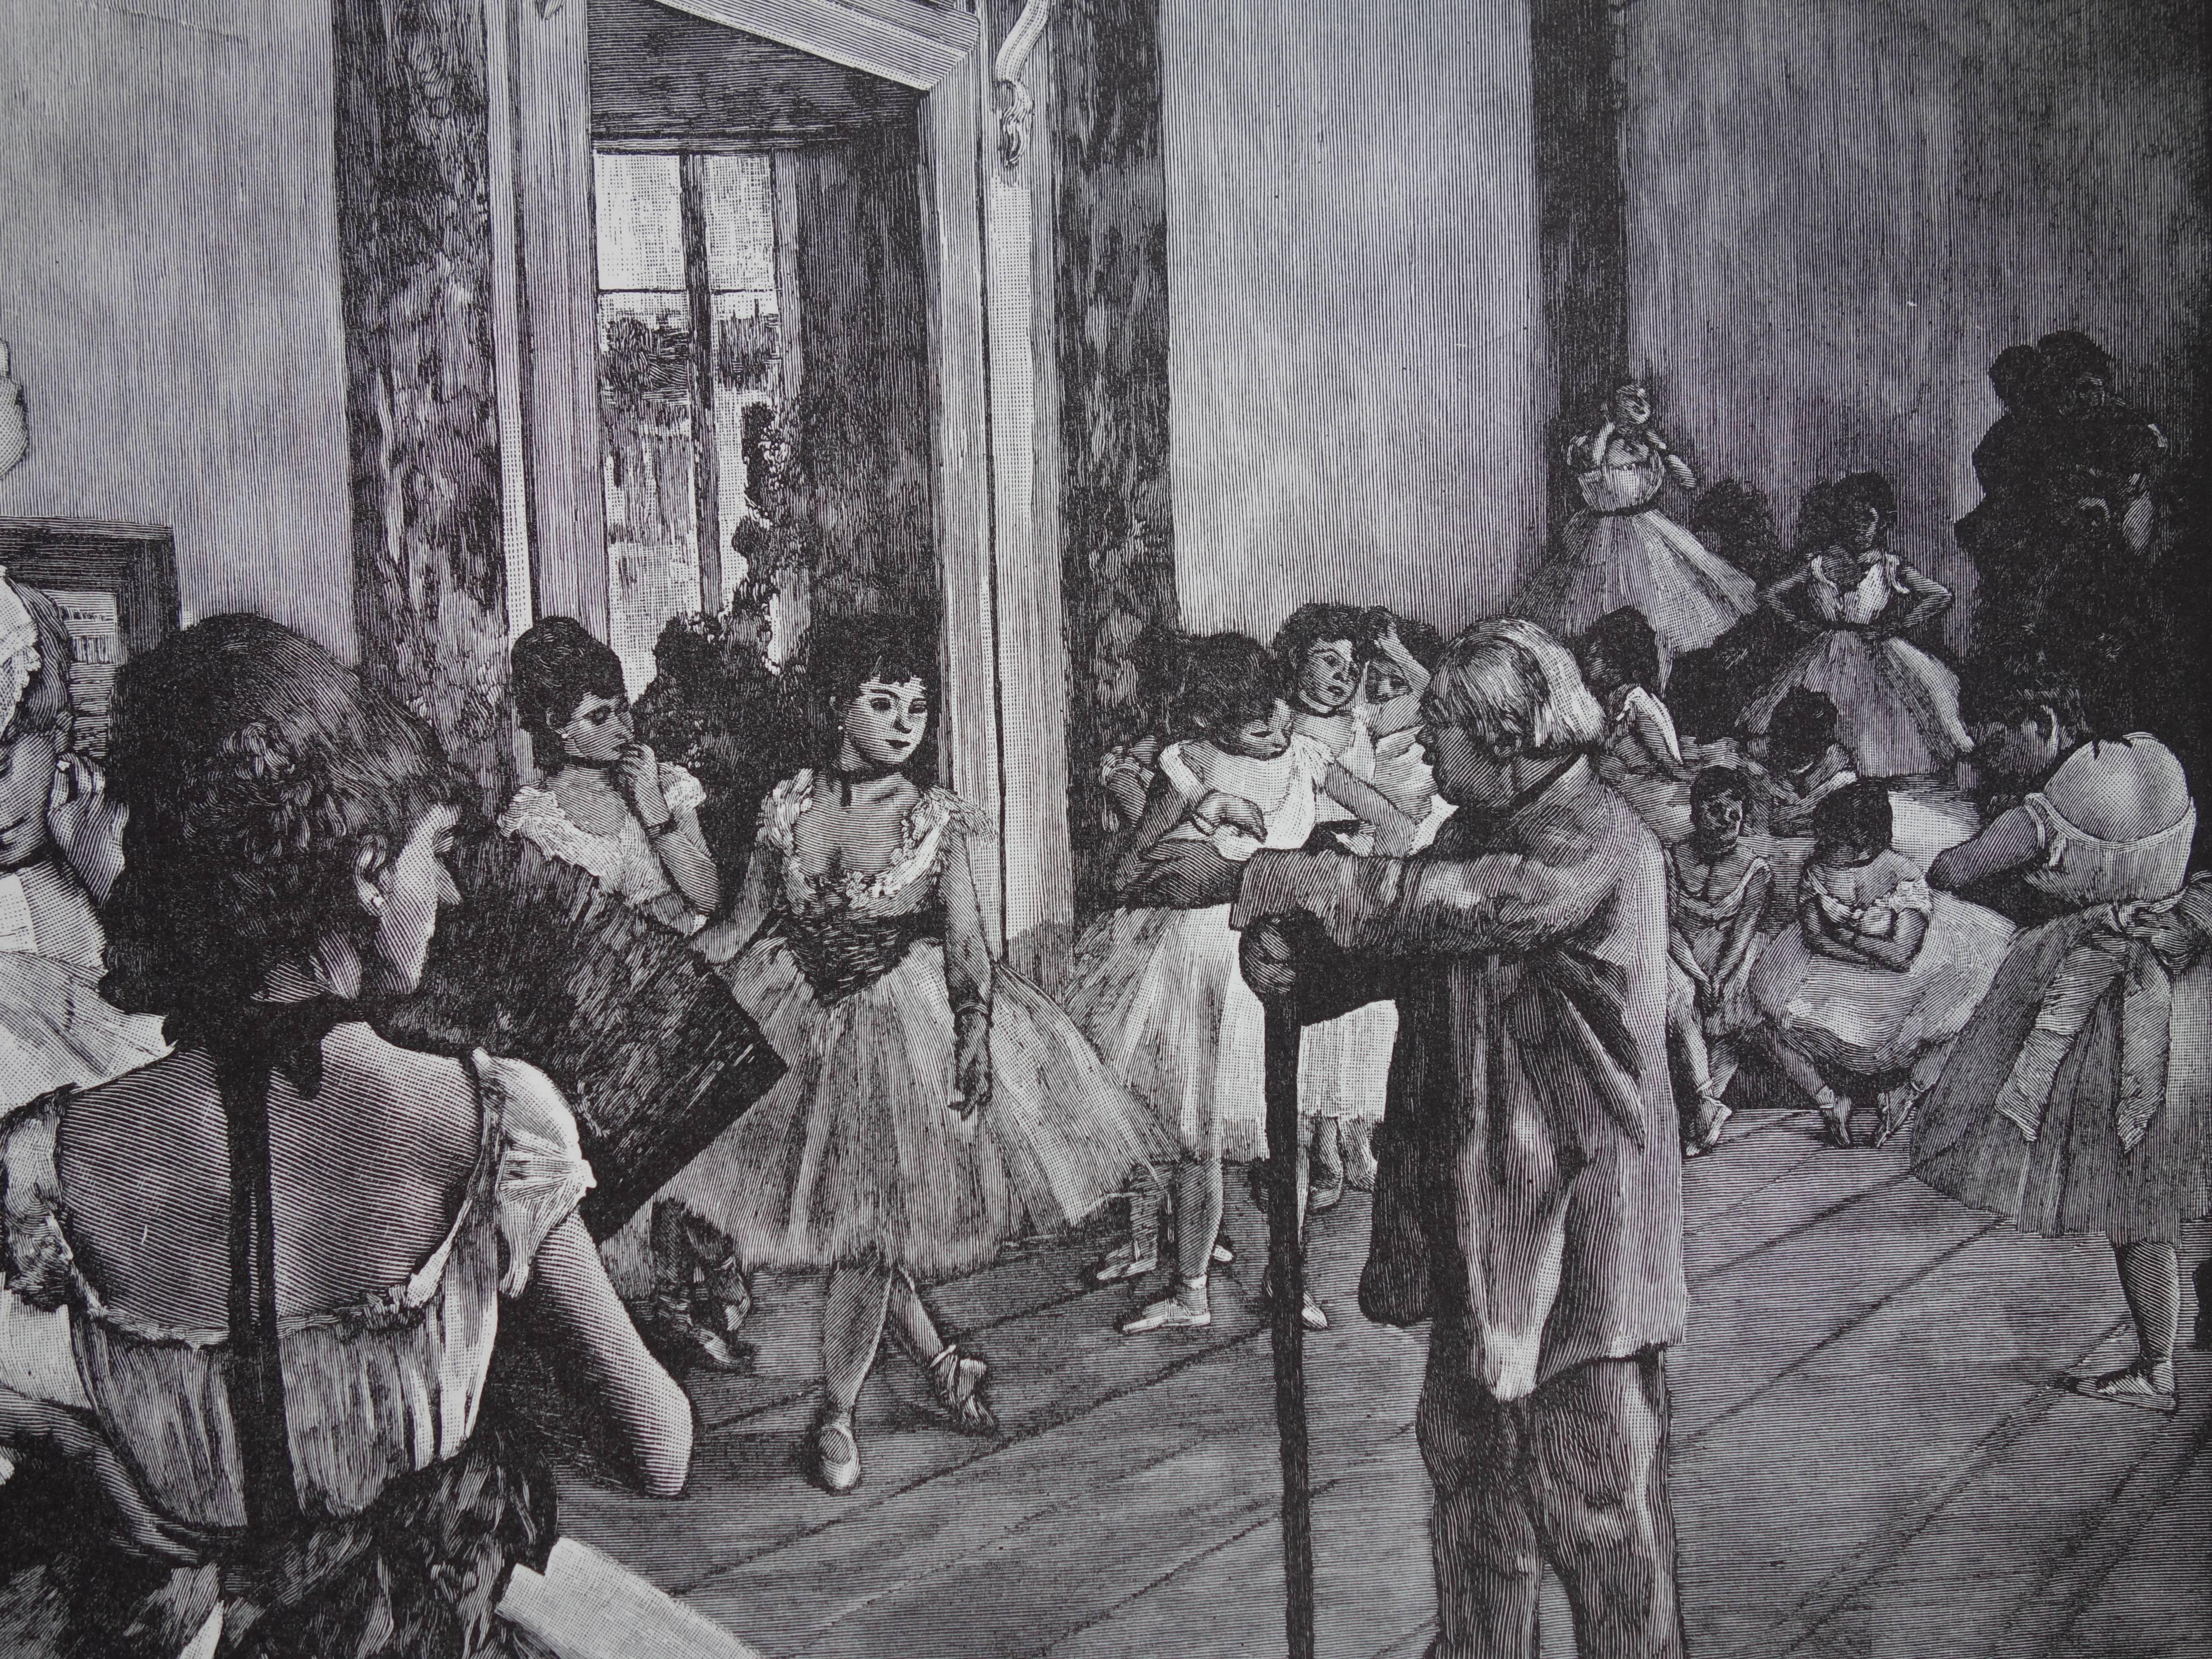 Edgar DEGAS (after)
Dance class

Woodcut print after a painting of Degas
Egraved by G. Regnier
On vellum 65 x 50 cm (c. 26 x 20in)
Edited by Chalcographie du Louvre, authenticated with the blind stamp of Museum workshop
This woodcut print is very